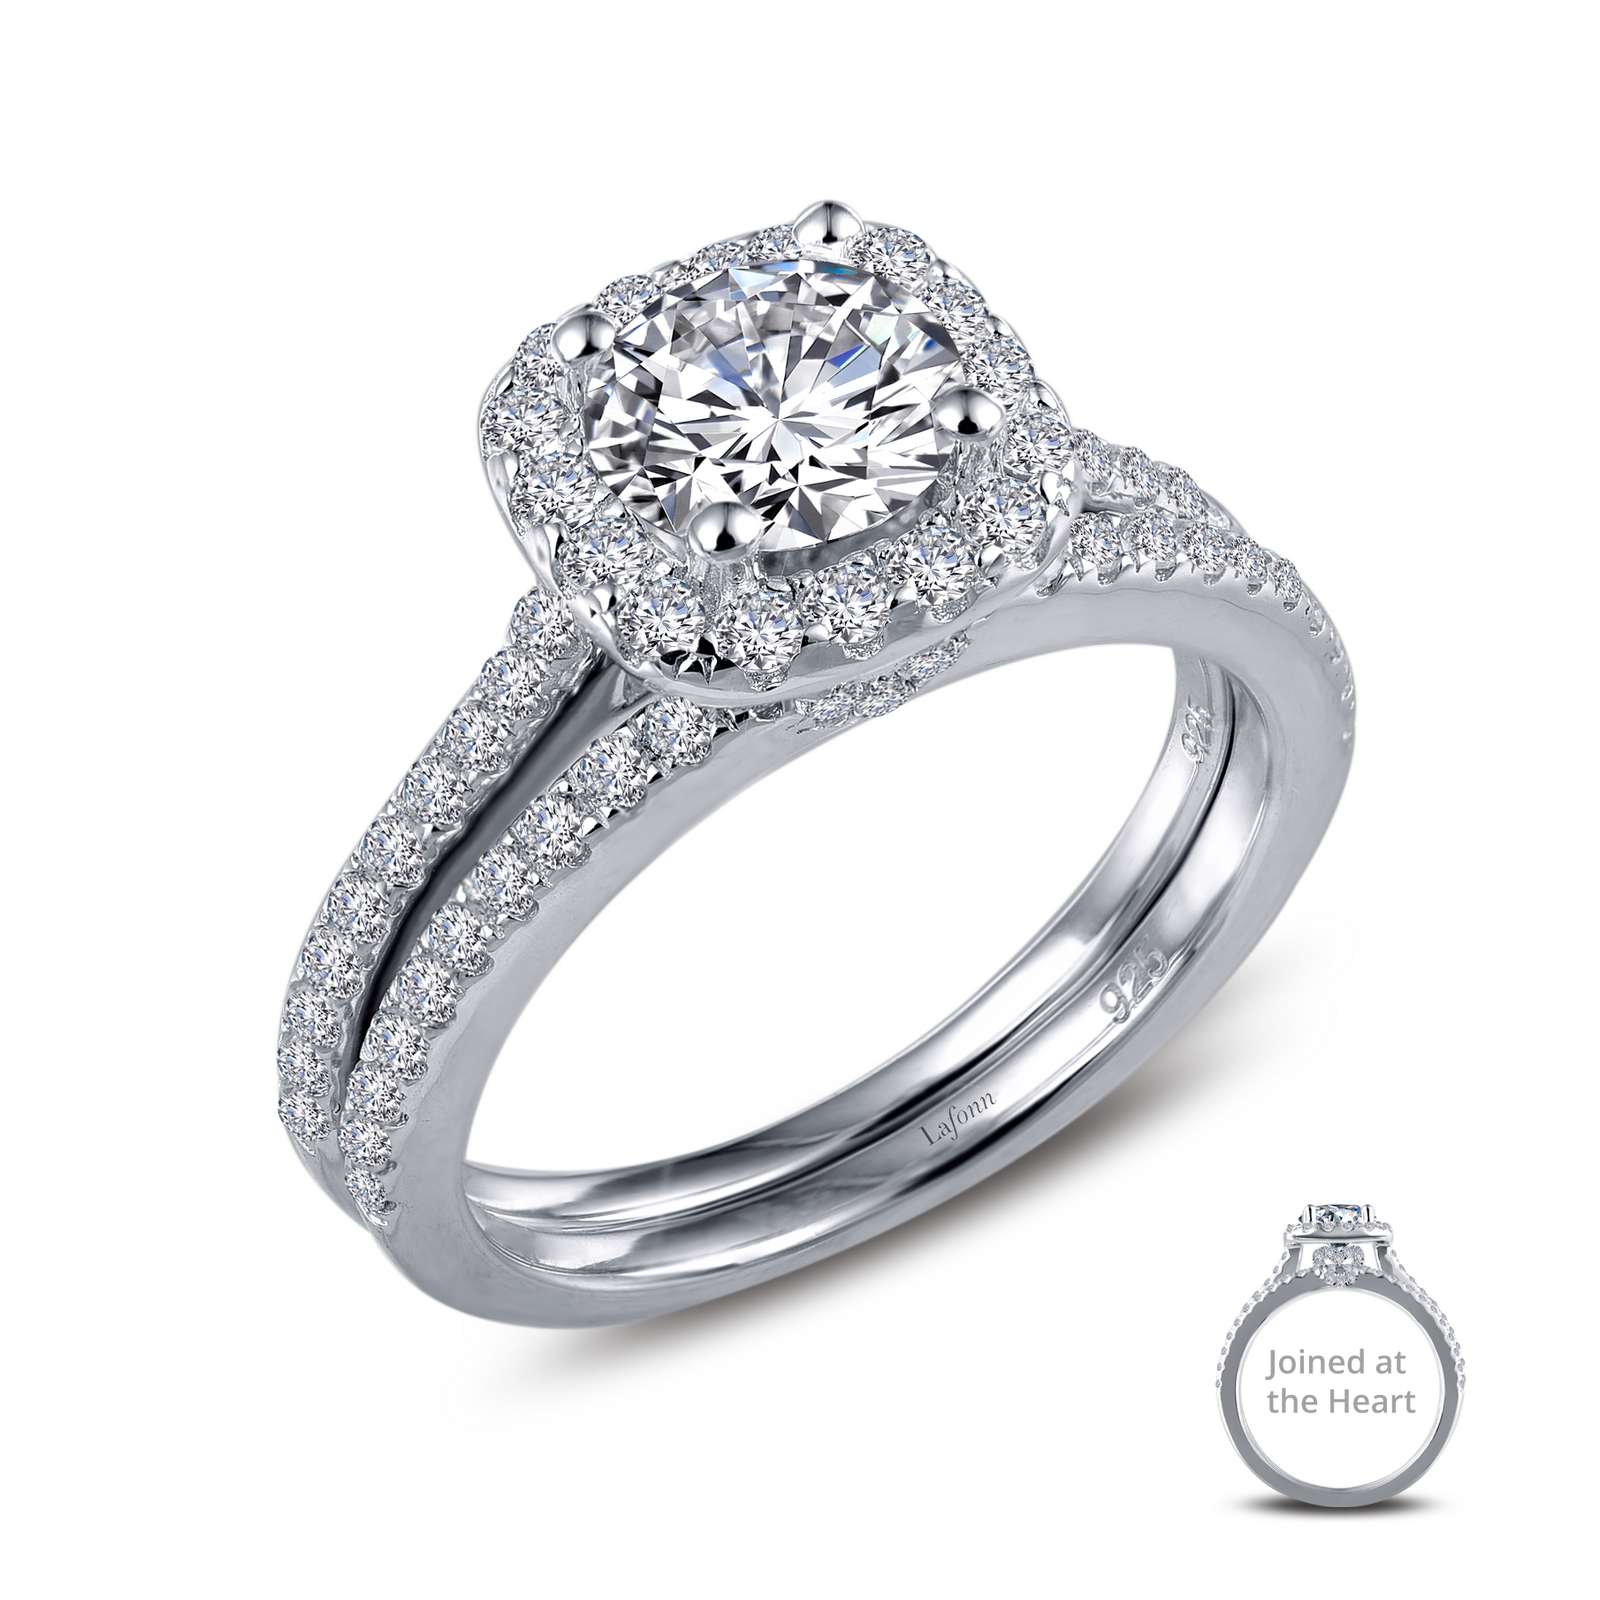 Joined-At-The-Heart Wedding Set Wood's Jewelers Mt. Pleasant, PA